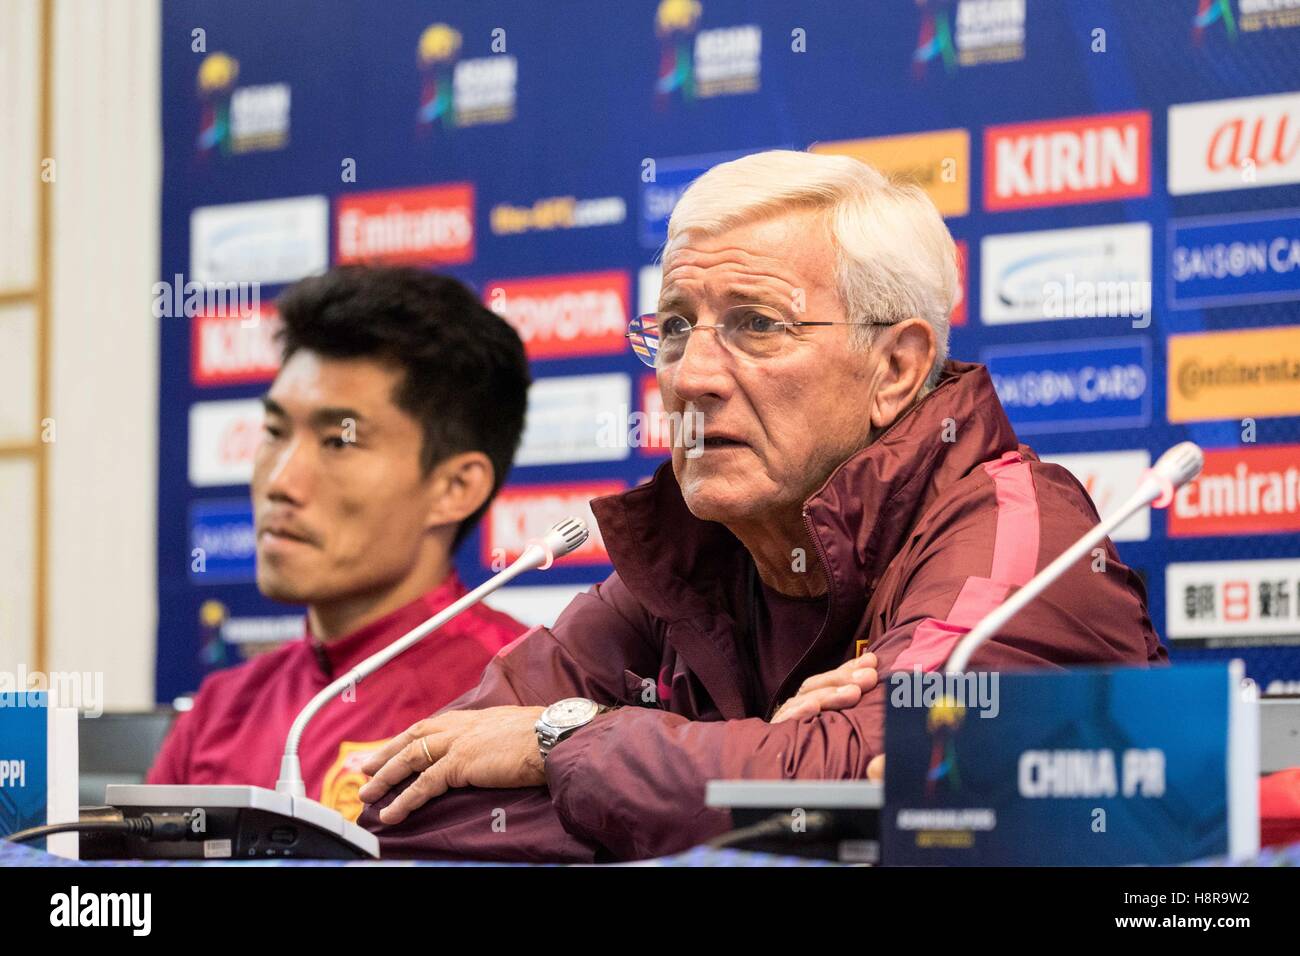 Kunmin, Kunmin, China. 14th Nov, 2016. Kunming, CHINA-November 14 2016: (EDITORIAL USE ONLY. CHINA OUT) .Marcello Lippi at the press conference before China national football team attends the World Cup Qualifying Match in Kunming, south China's Yunnan Province, November 14th, 2016. Former World Cup-winning coach Marcello Lippi was named to lead China national football team following the resignation of Gao Hongbo this year. © SIPA Asia/ZUMA Wire/Alamy Live News Stock Photo